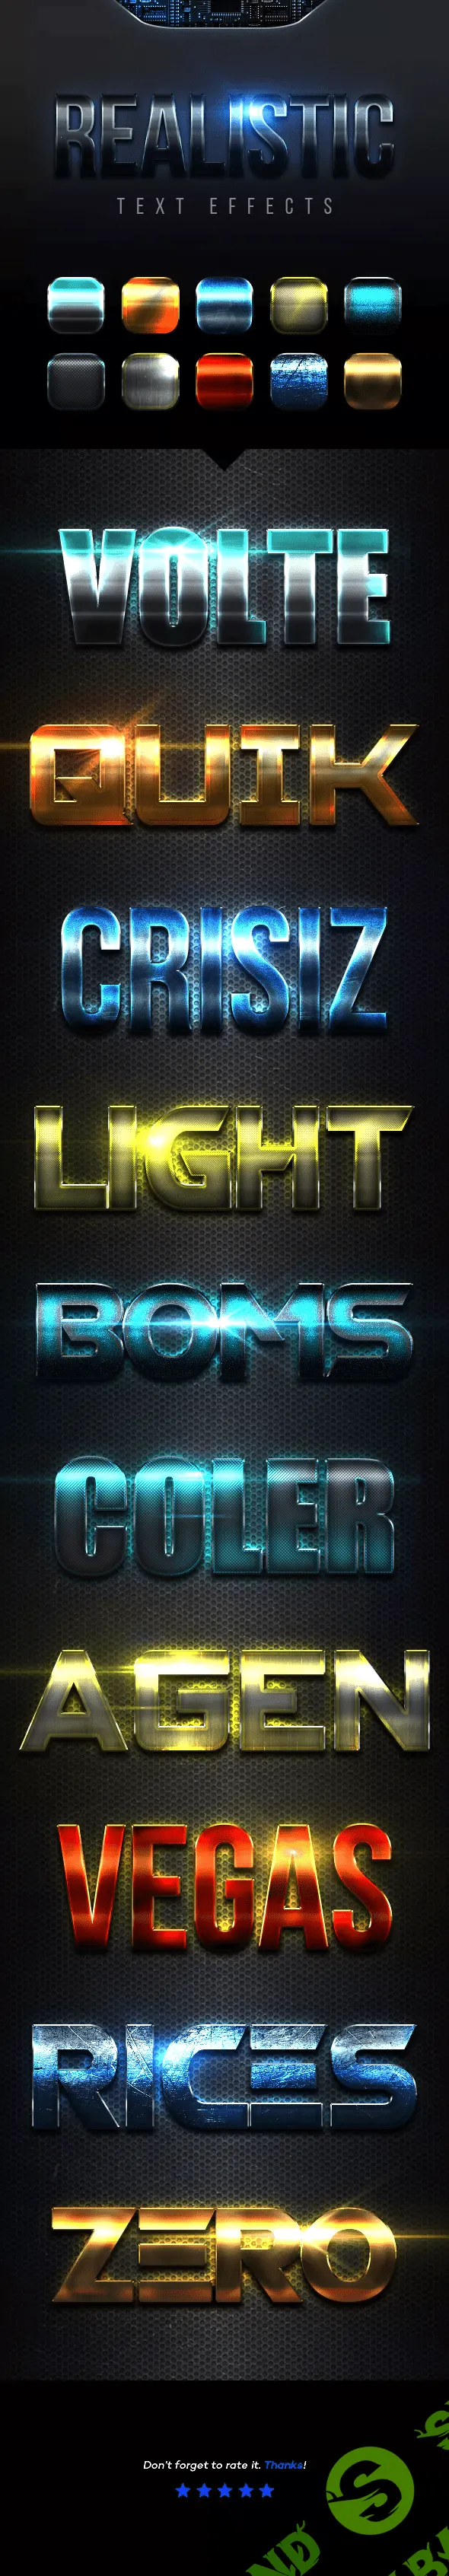 [Graphicriver] Realistic Text Effects Vol.4